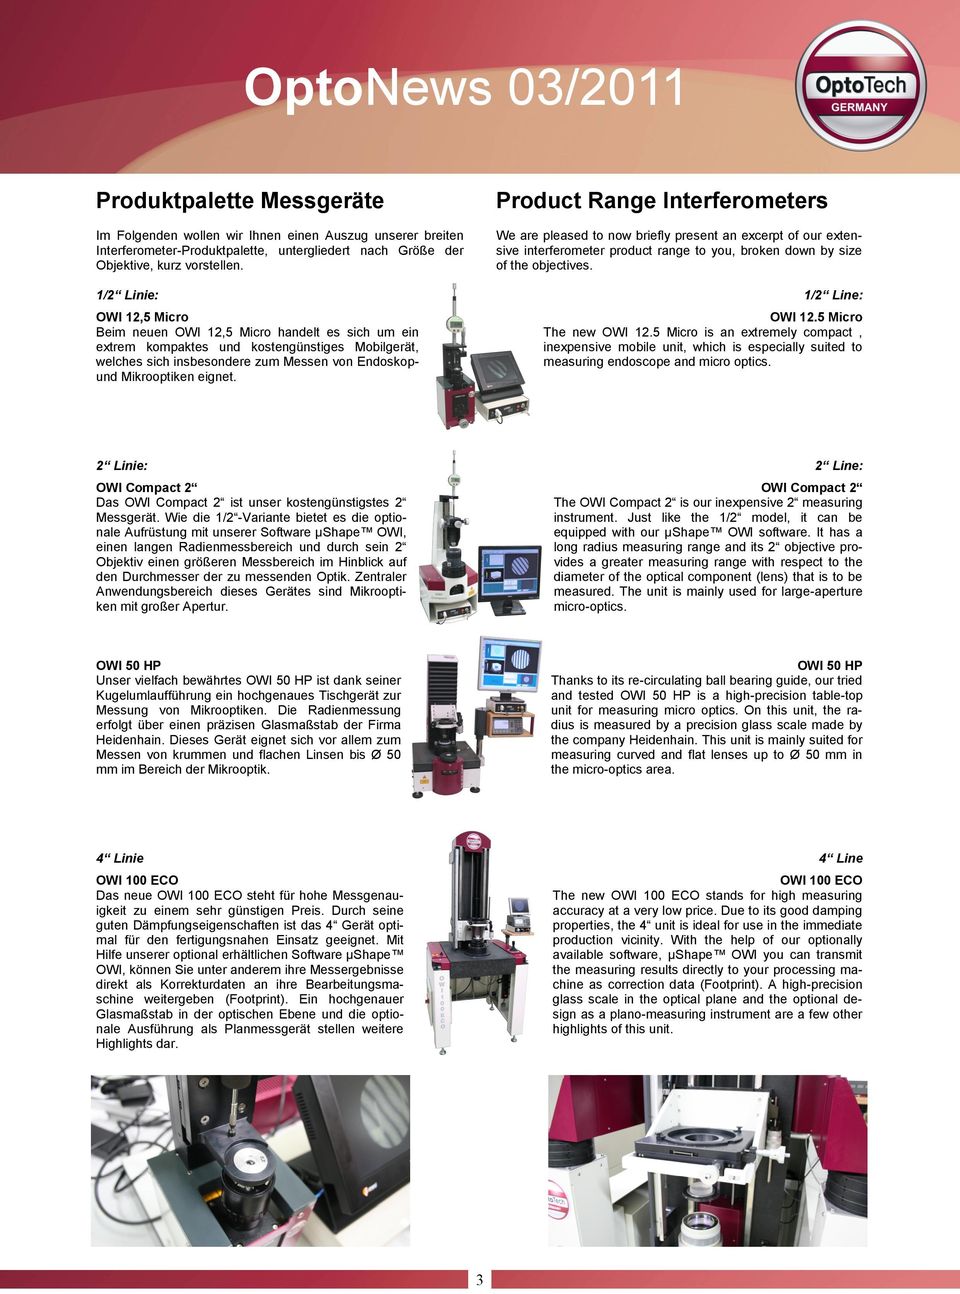 Product Range Interferometers We are pleased to now briefly present an excerpt of our extensive interferometer product range to you, broken down by size of the objectives. 1/2 Line: OWI 12.